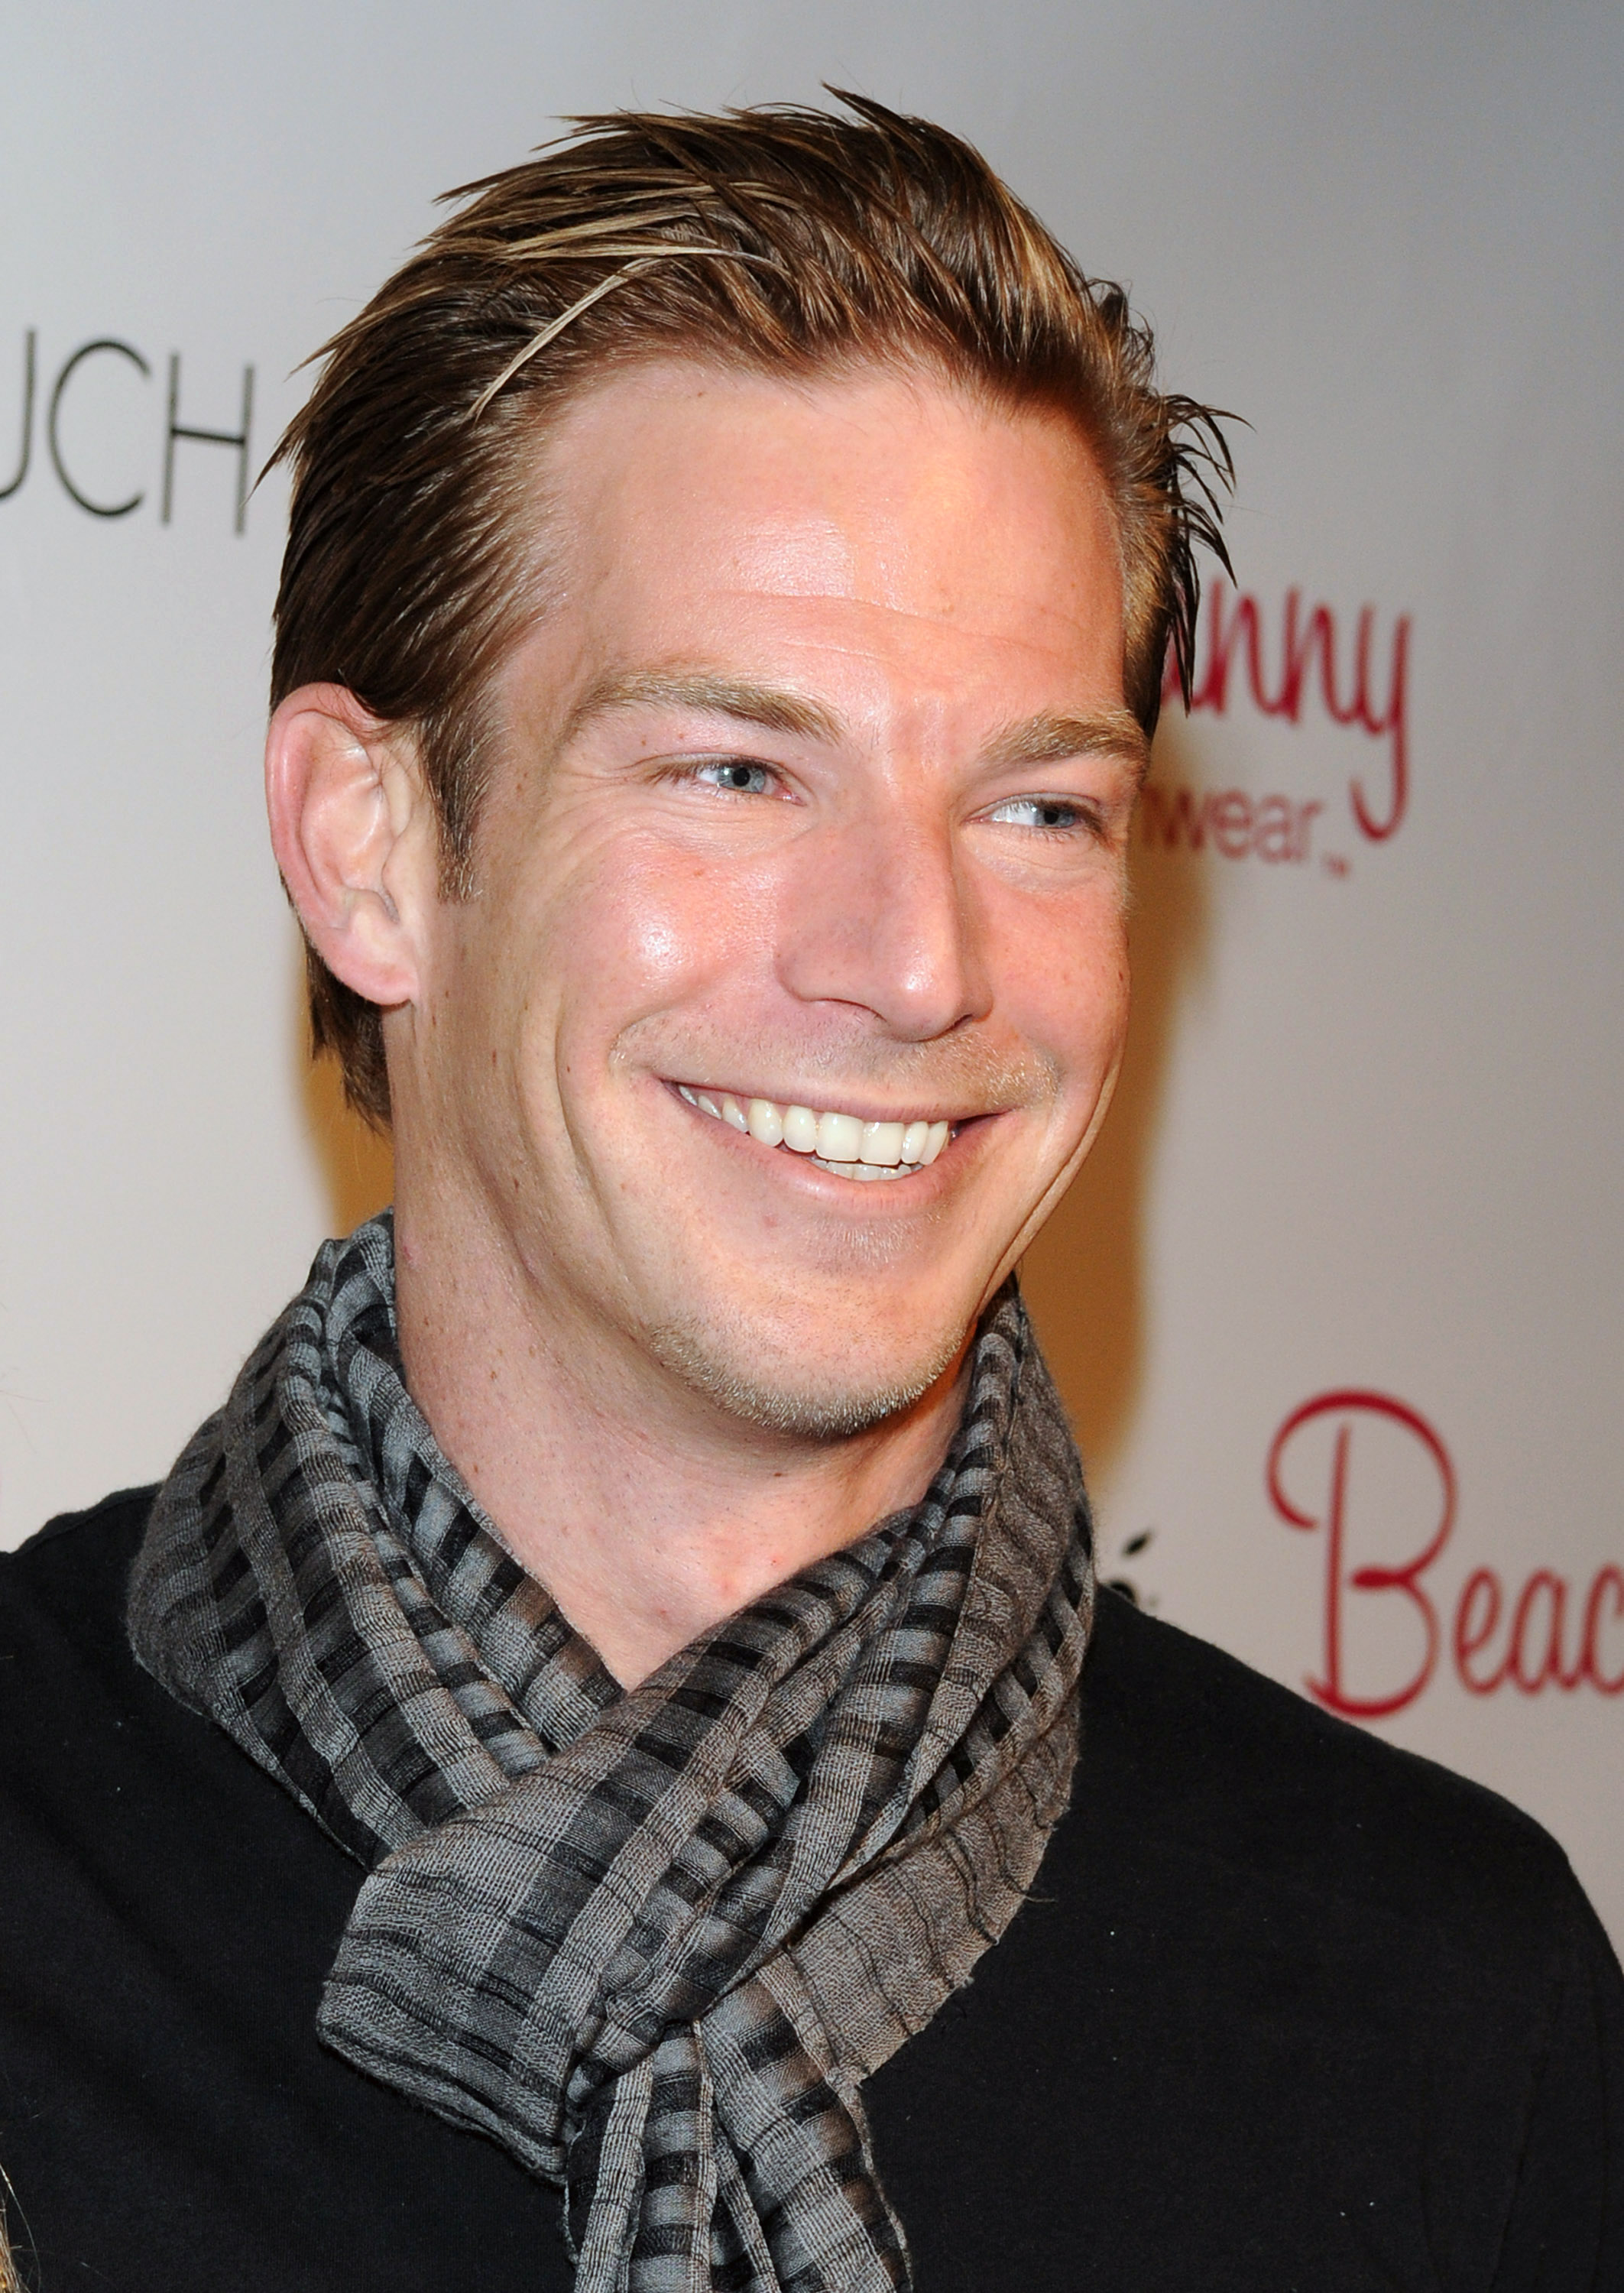 Sean Brosnan attends the grand opening party for Beach Bunny Swimwear on April 27, 2010 in Los Angeles, California | Source: Getty Images